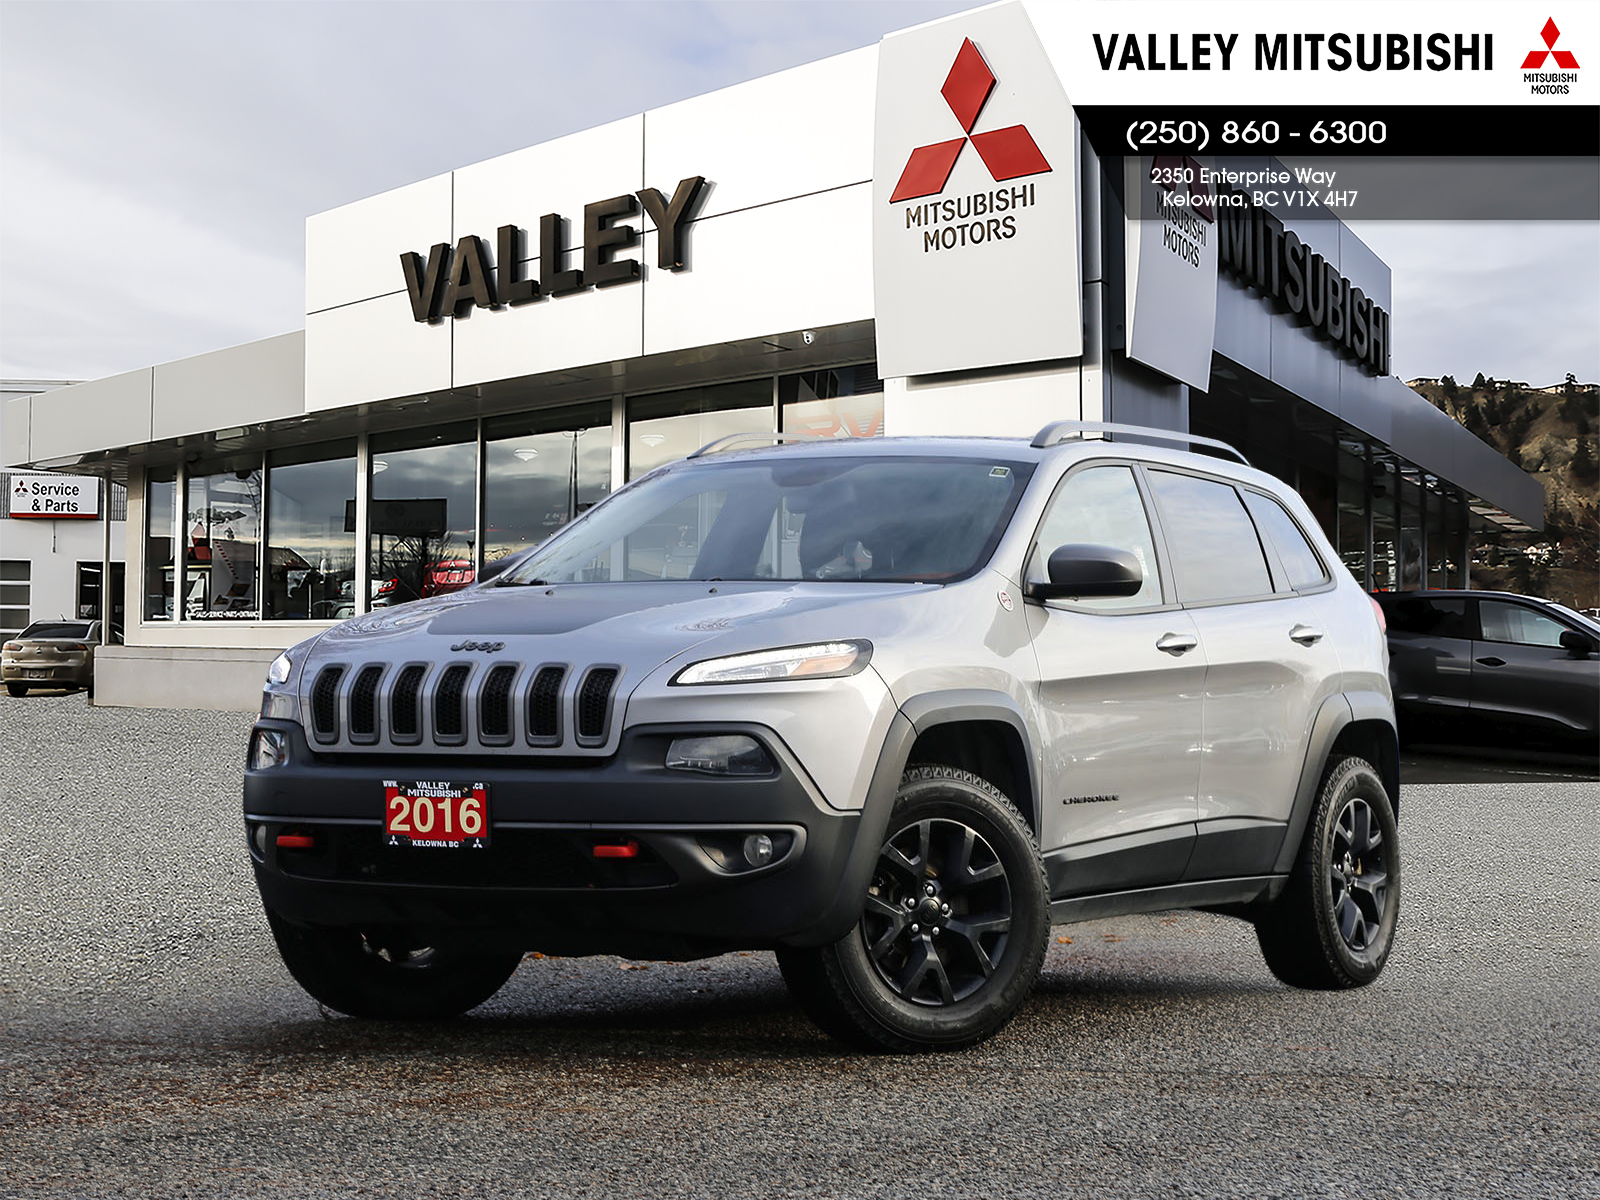 2016 Jeep Cherokee TRAILHAWK, LEATHER, 4X4, LOW KM, NO ACCIDENTS!  